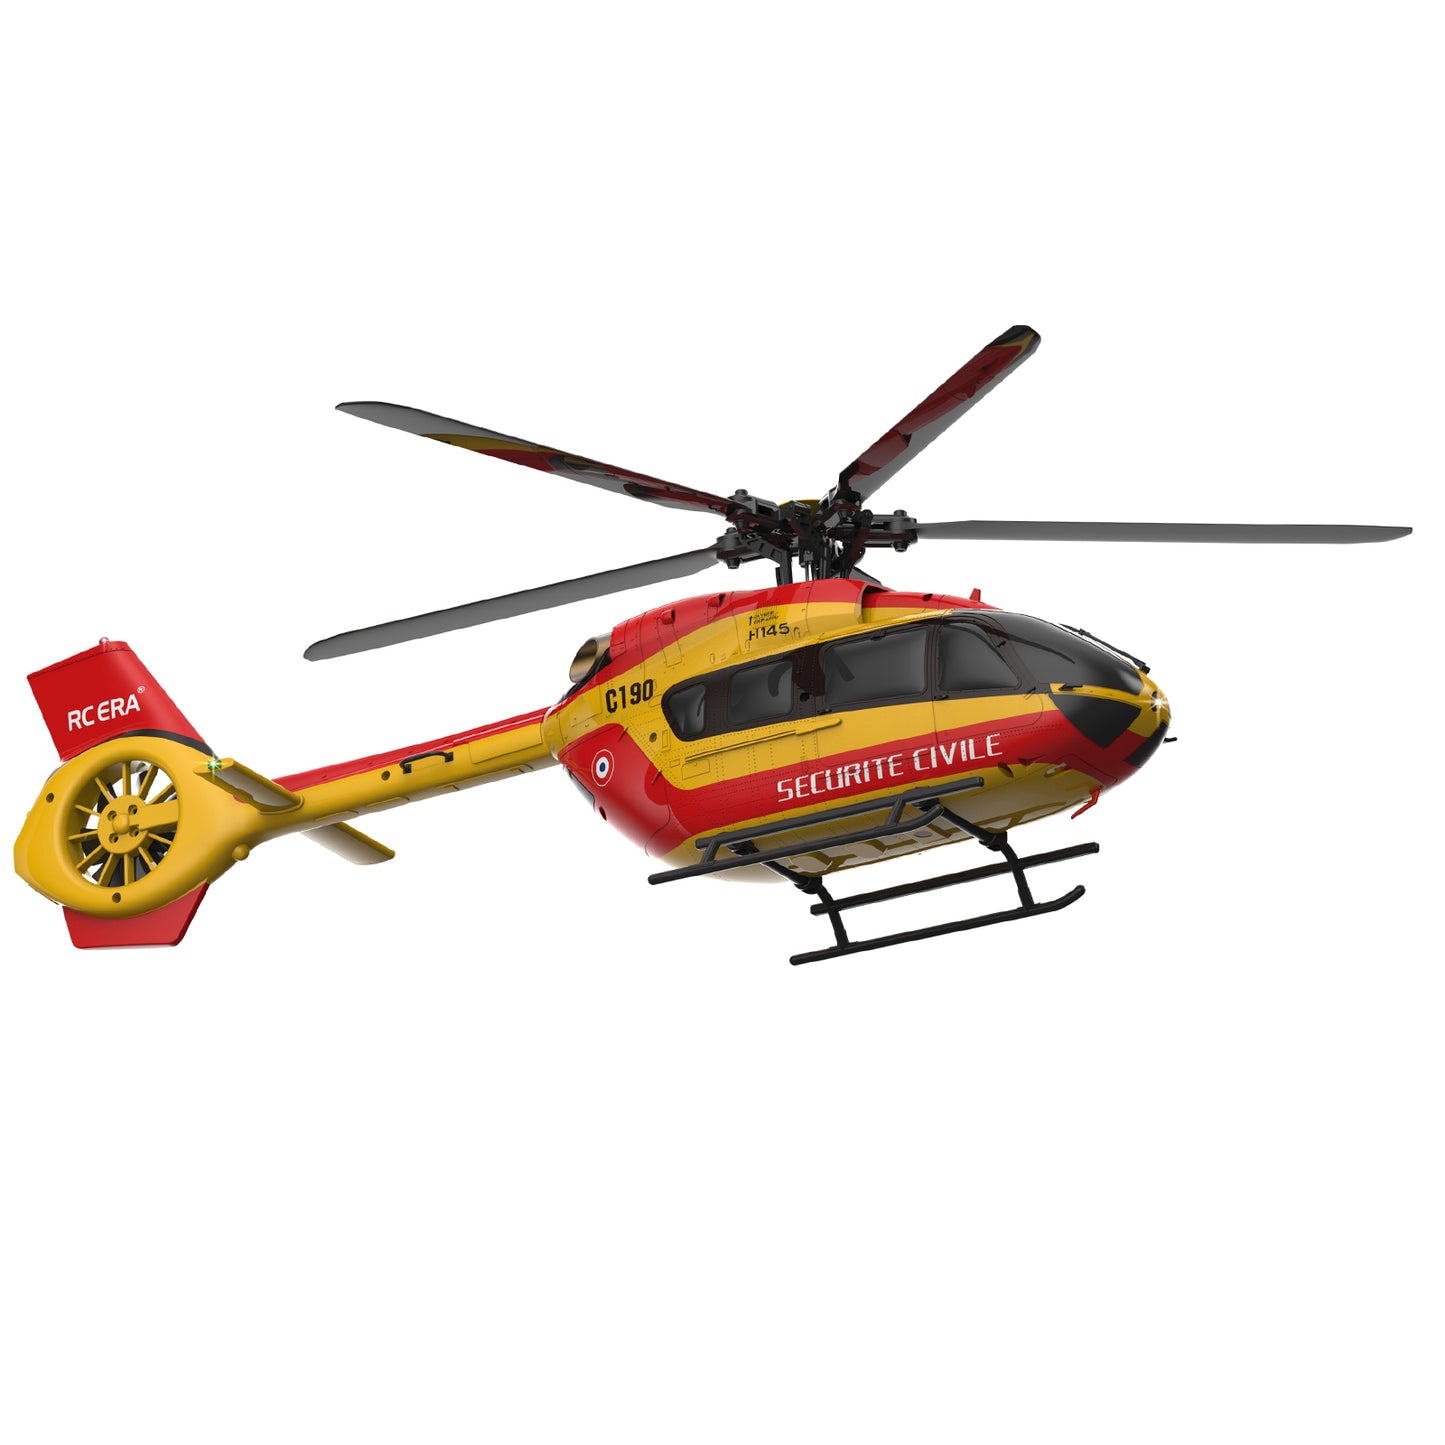 Rc era H145 rc helicopter